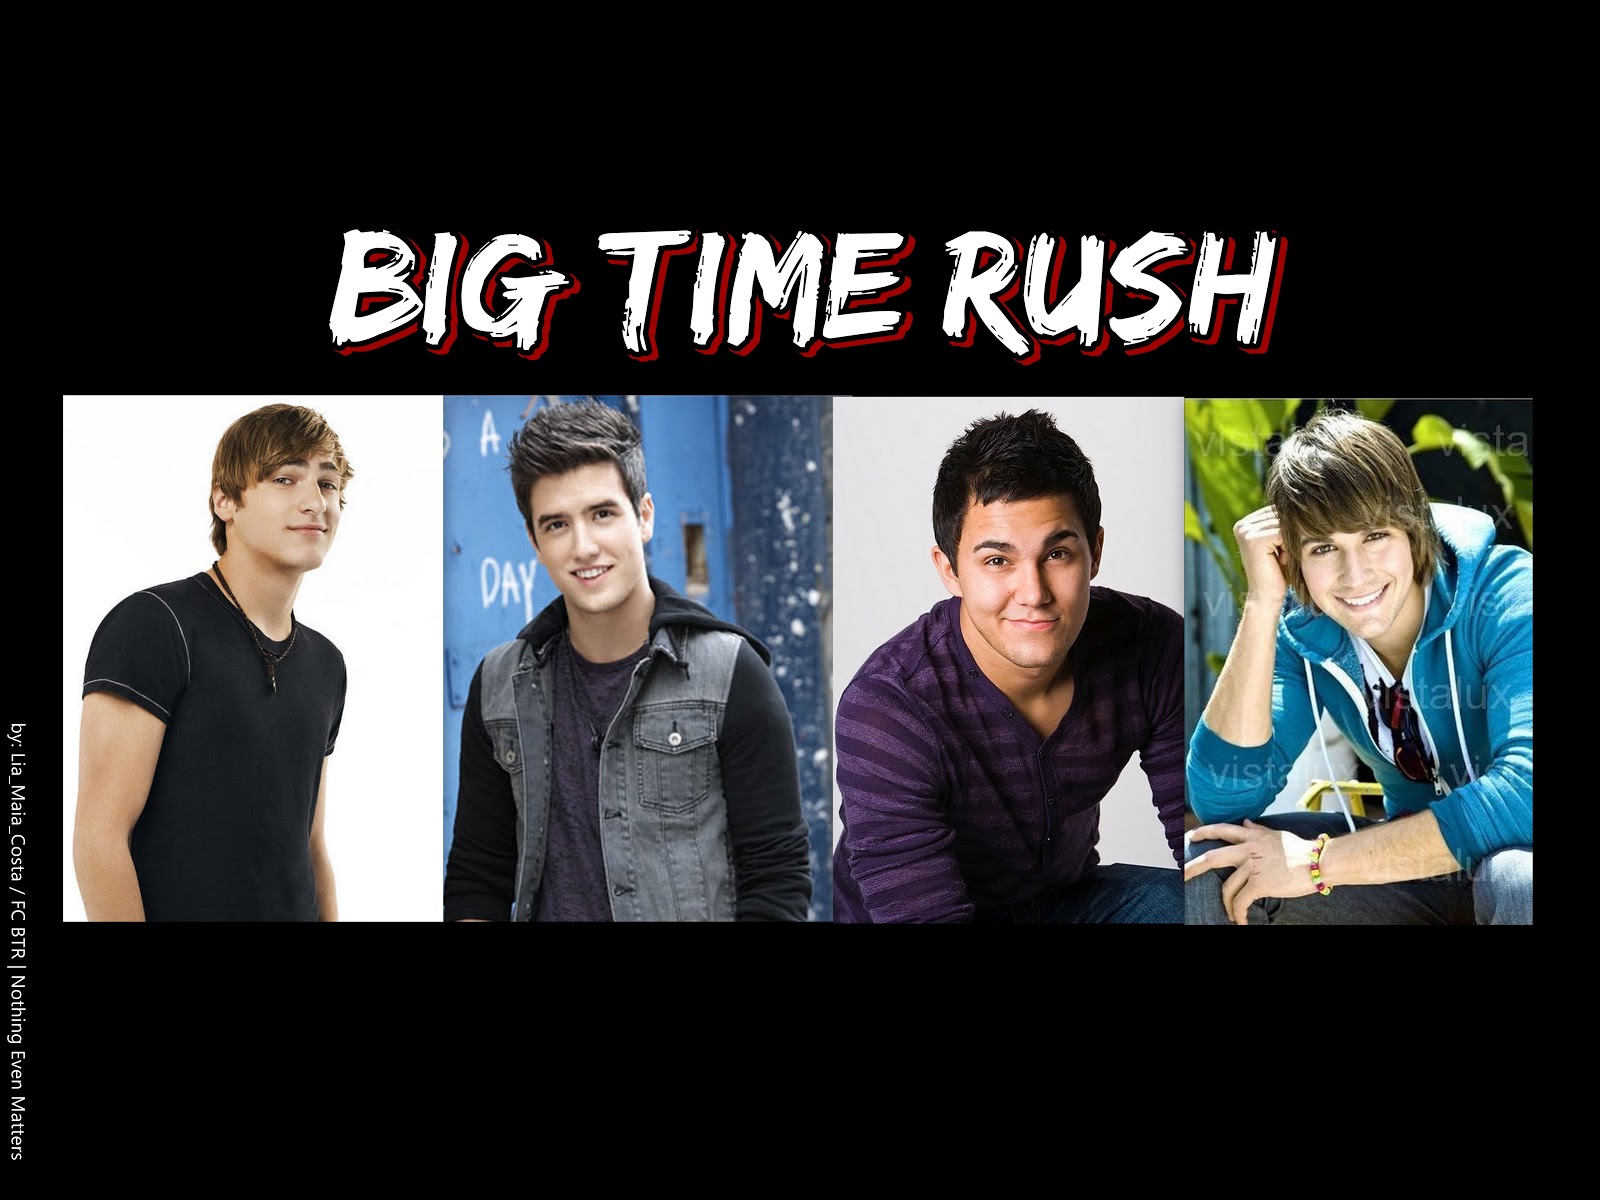 big time rush wallpaper,social group,product,youth,text,font